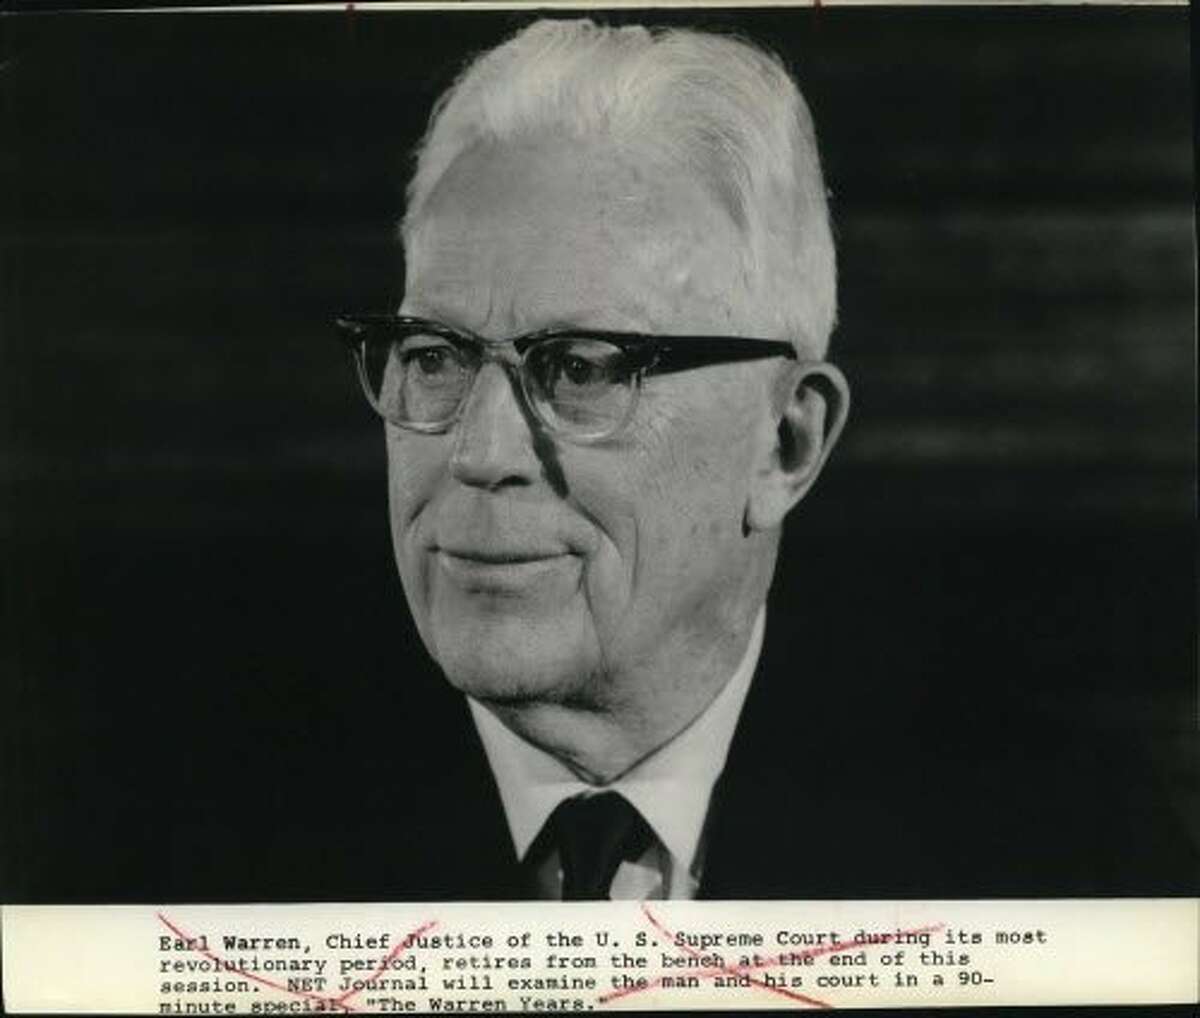 Earl Warren, Chief Justice of the US Supreme Court during its most revolutionary period, retires from the bench at the end of this session. NET Journal will examine the man and his court in a 90-minute special, "The Warren Years."